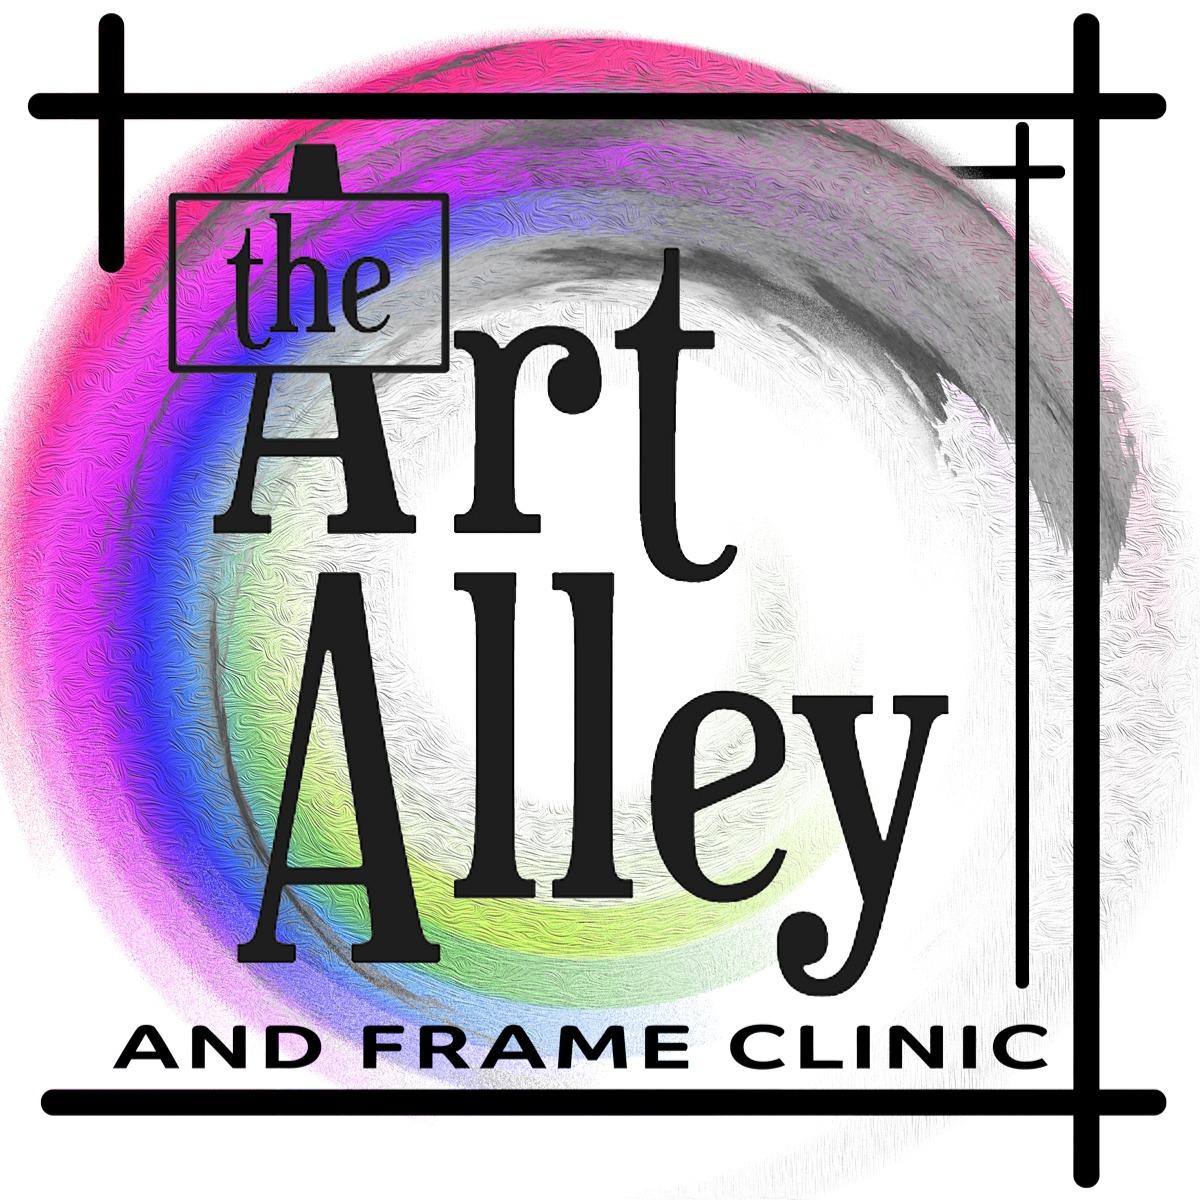 Art Alley and Frame Clinic